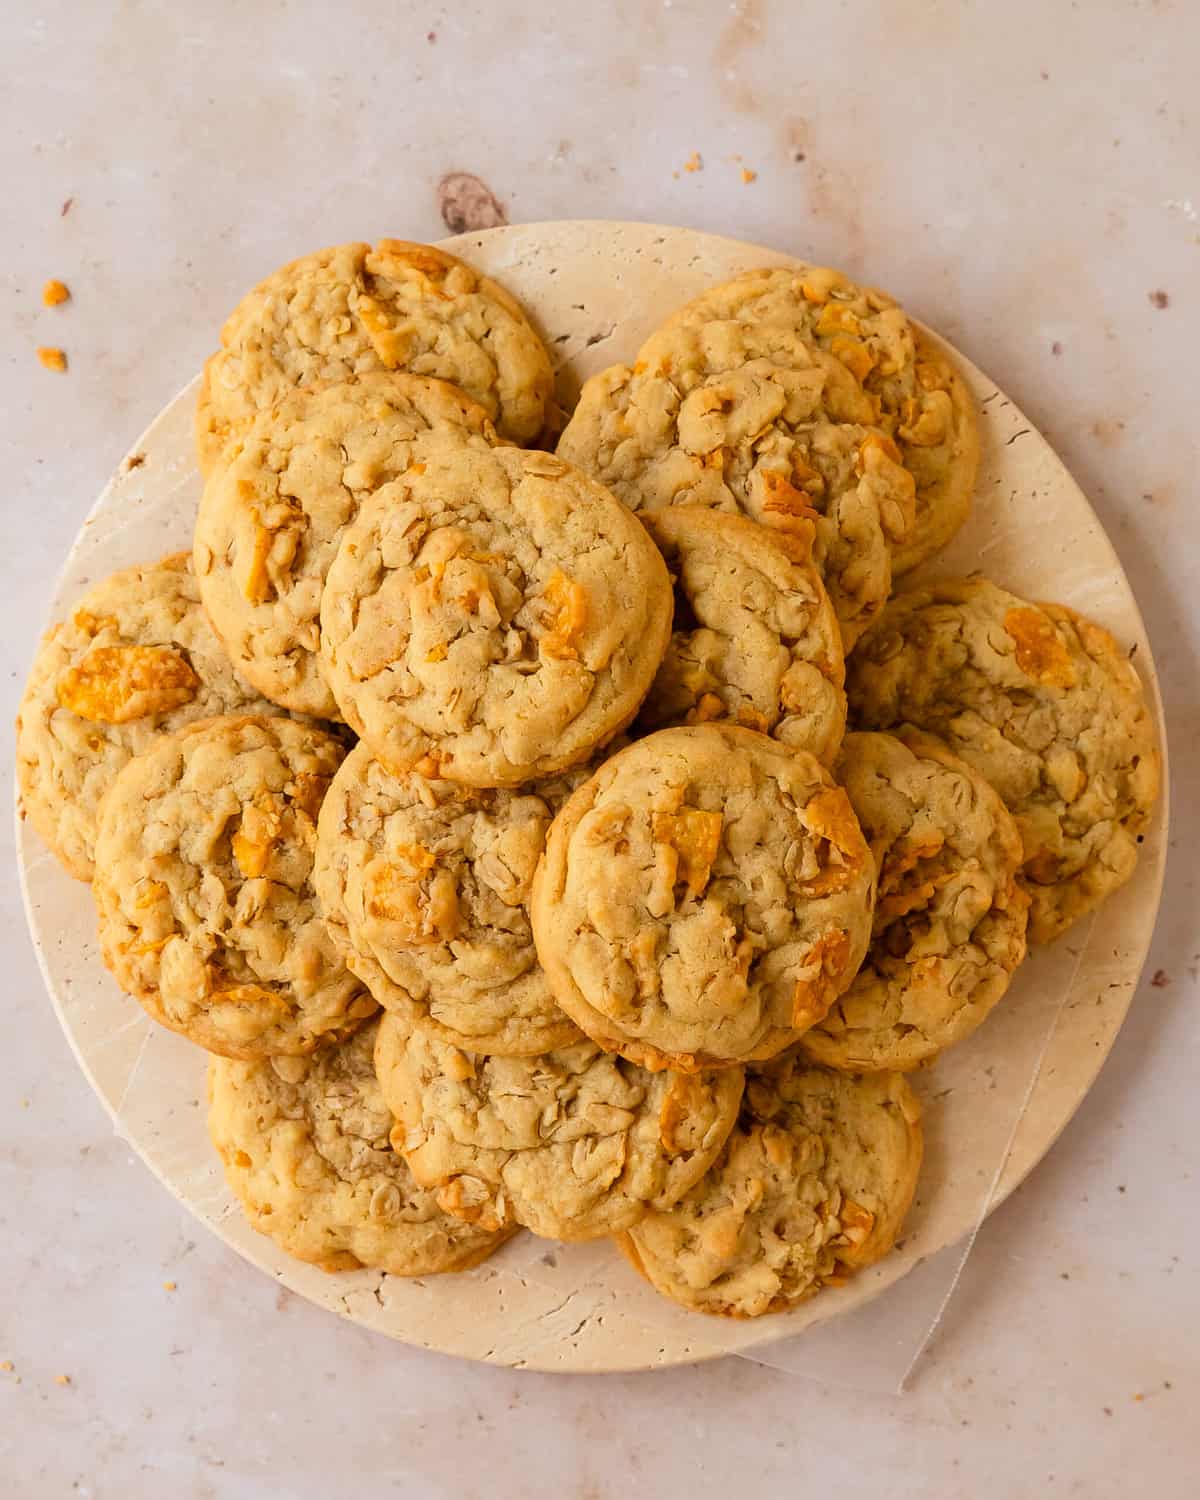 Cornflake cookies are thick and buttery cookies filled with old fashioned oats and cornflakes. These cookies with corn flakes have crisp edges and chewy centers. This cornflake cookie recipe easy to make, bake and enjoy in under an hour.